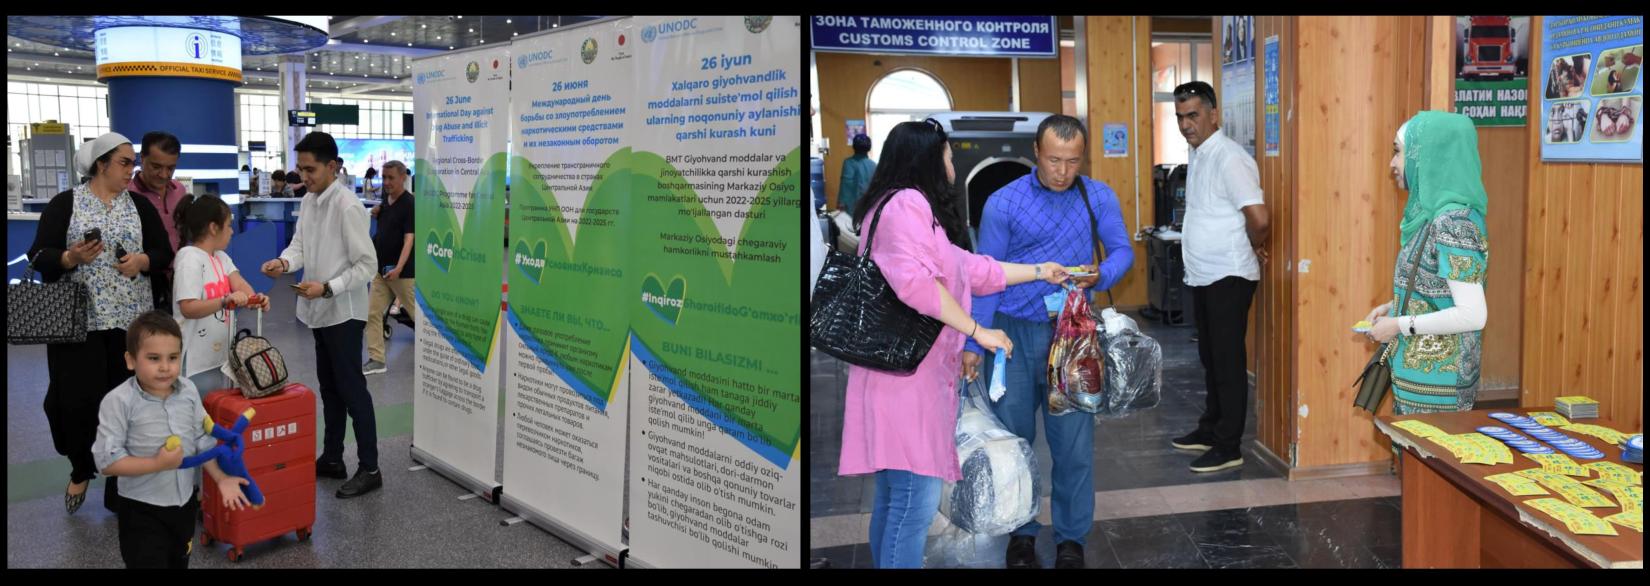 Photos of the events organized for public on World Drug Day 2022 (people at the information stand, reading the text)